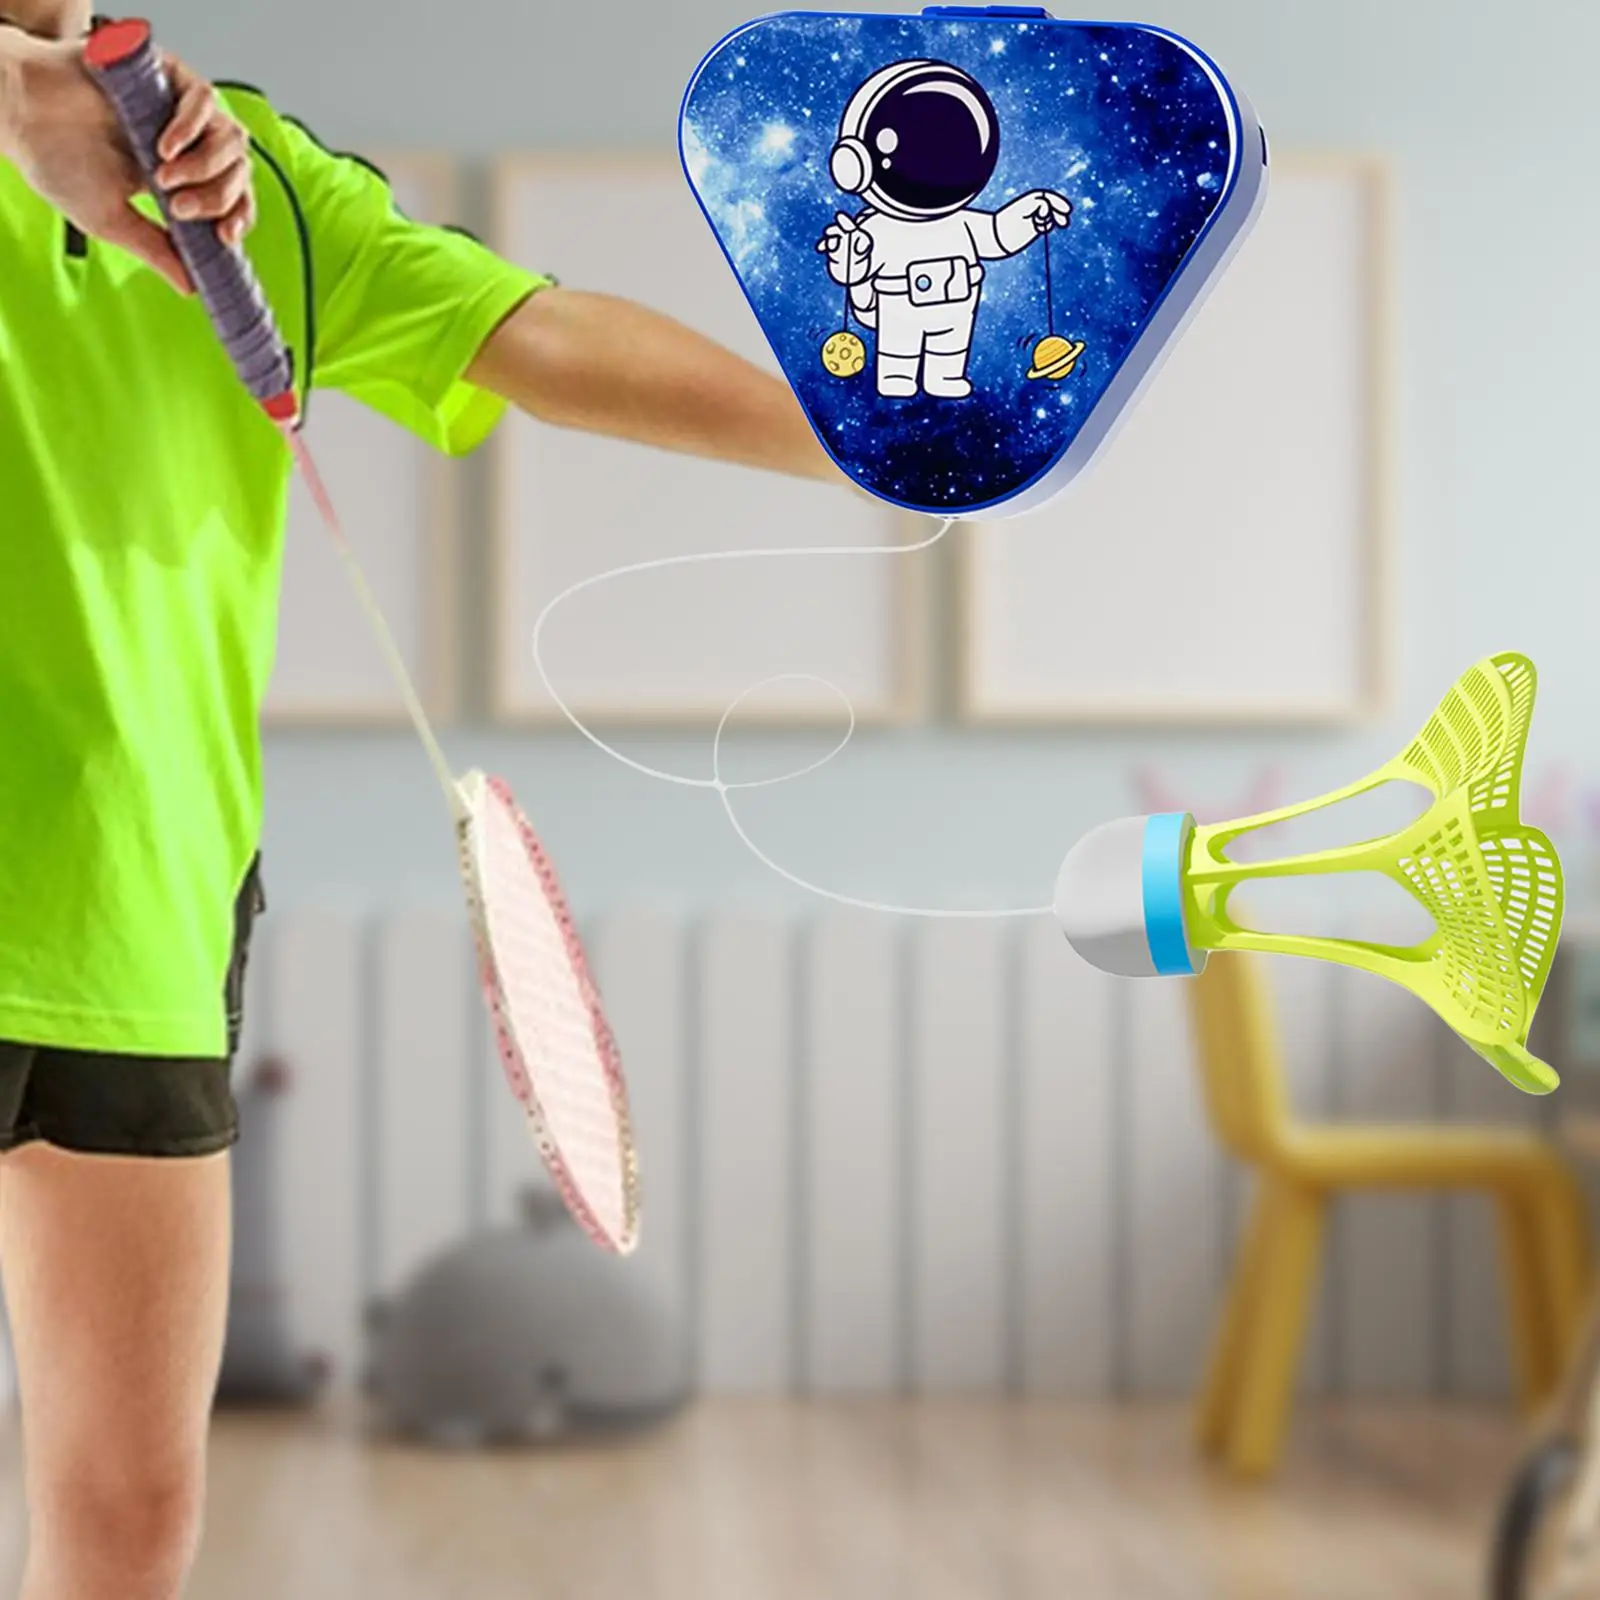 

Indoor Badminton Solo Trainer Self Training Device Tool Funny with Badminton Single Player Practice for Sports Exercise Home